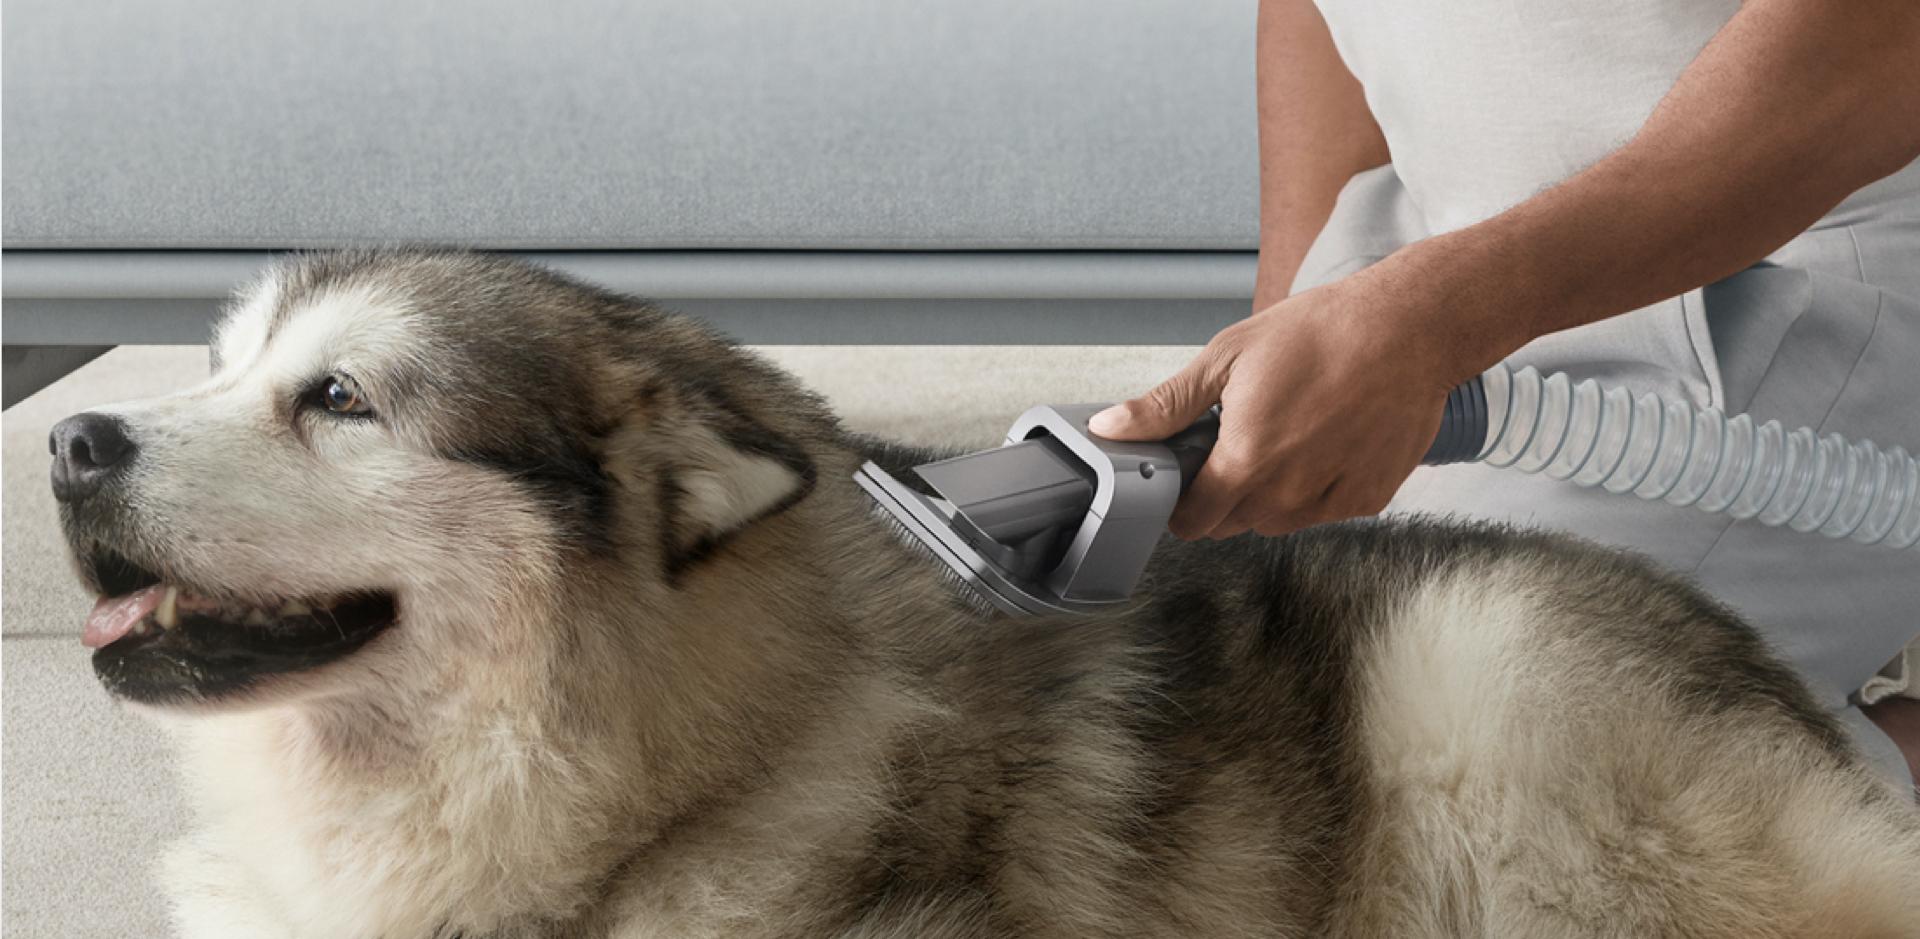 Pet grooming kit for Dyson vacuums